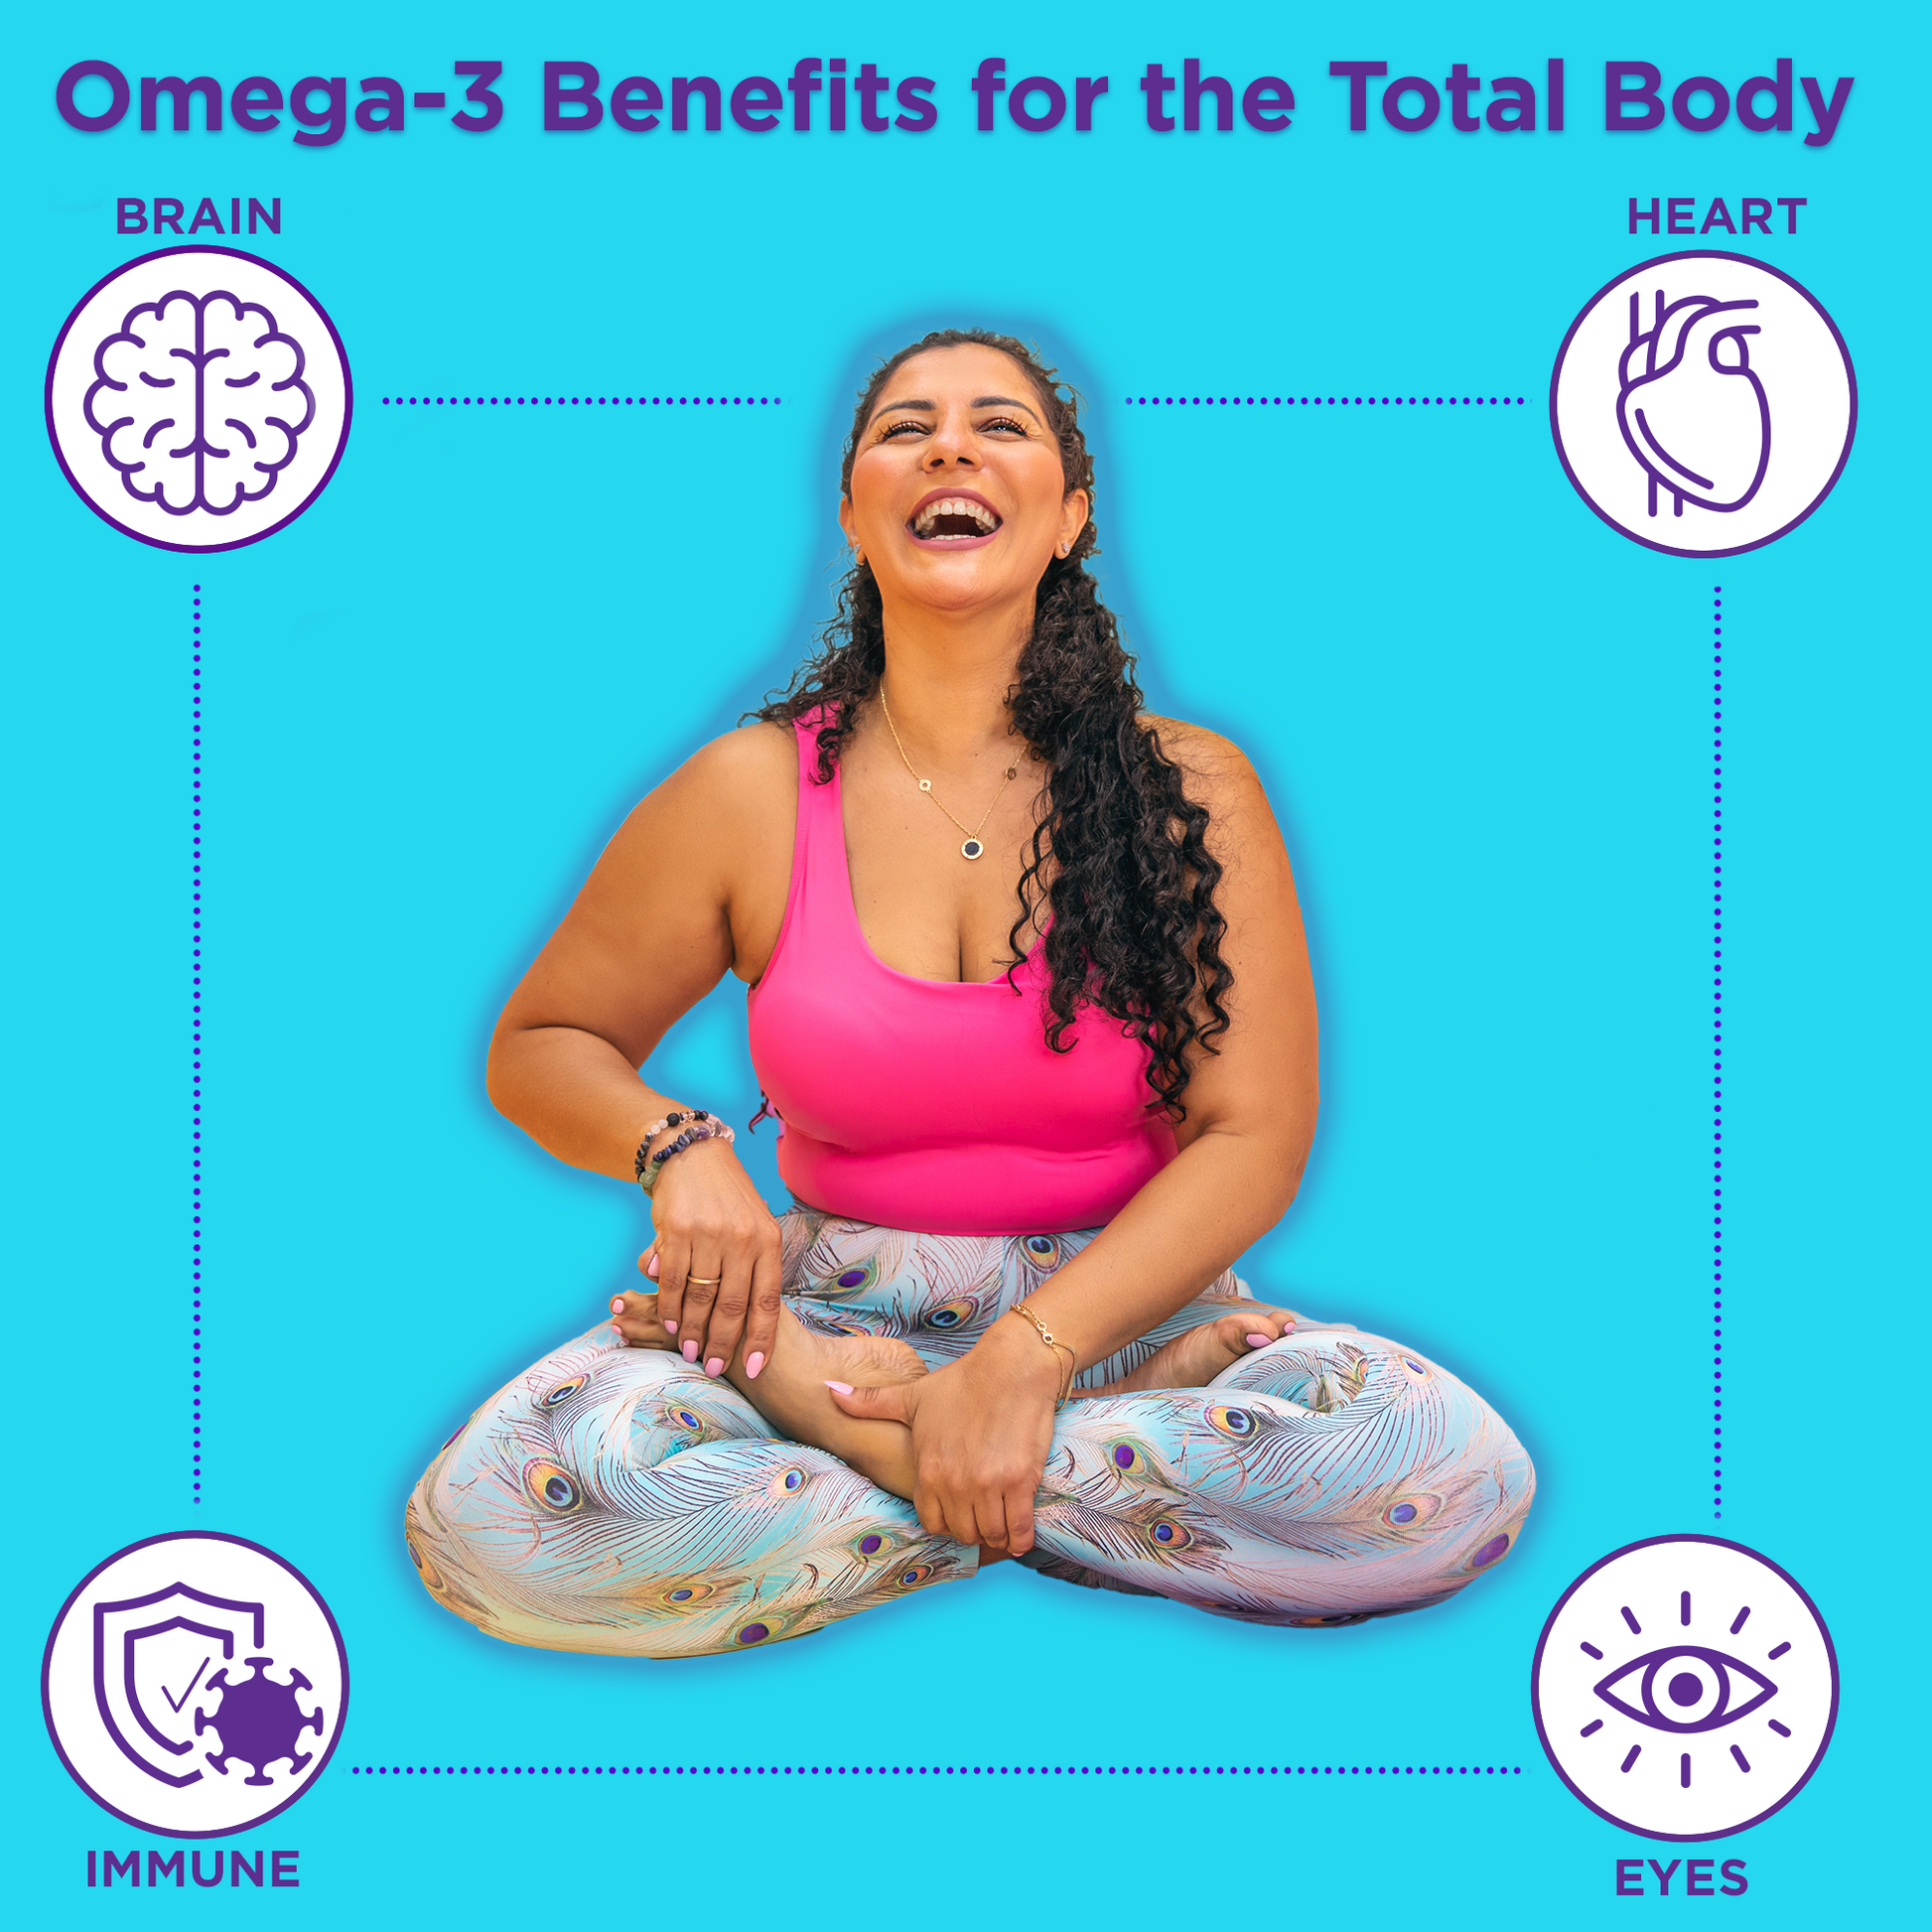 Omega-3s benefit the total body, especially the brain, heart, immune system, and eyes